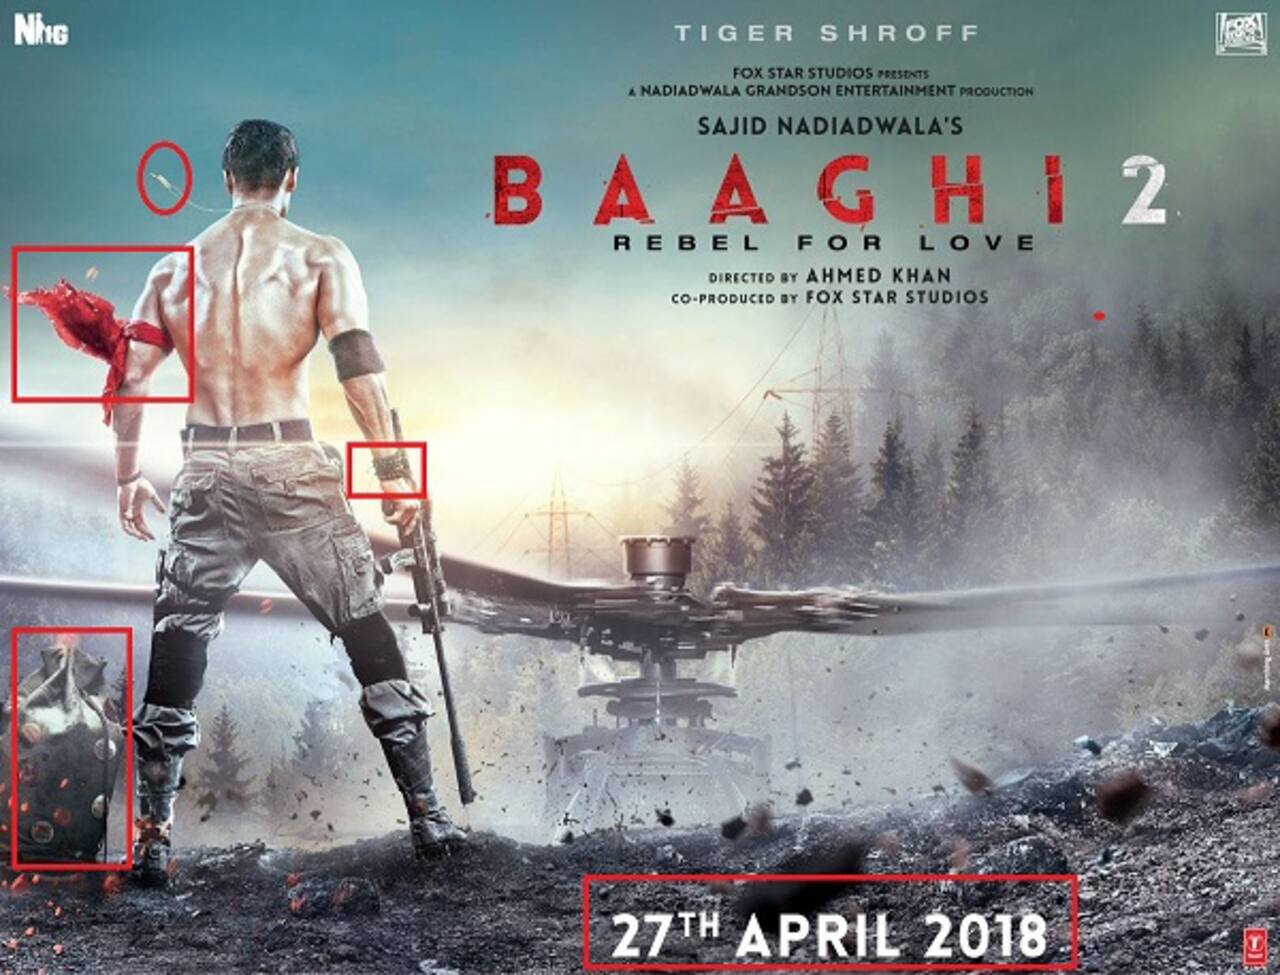 Did you catch these clues about the story in Tiger Shroff's Baaghi 2  poster? - Bollywood News & Gossip, Movie Reviews, Trailers & Videos at  